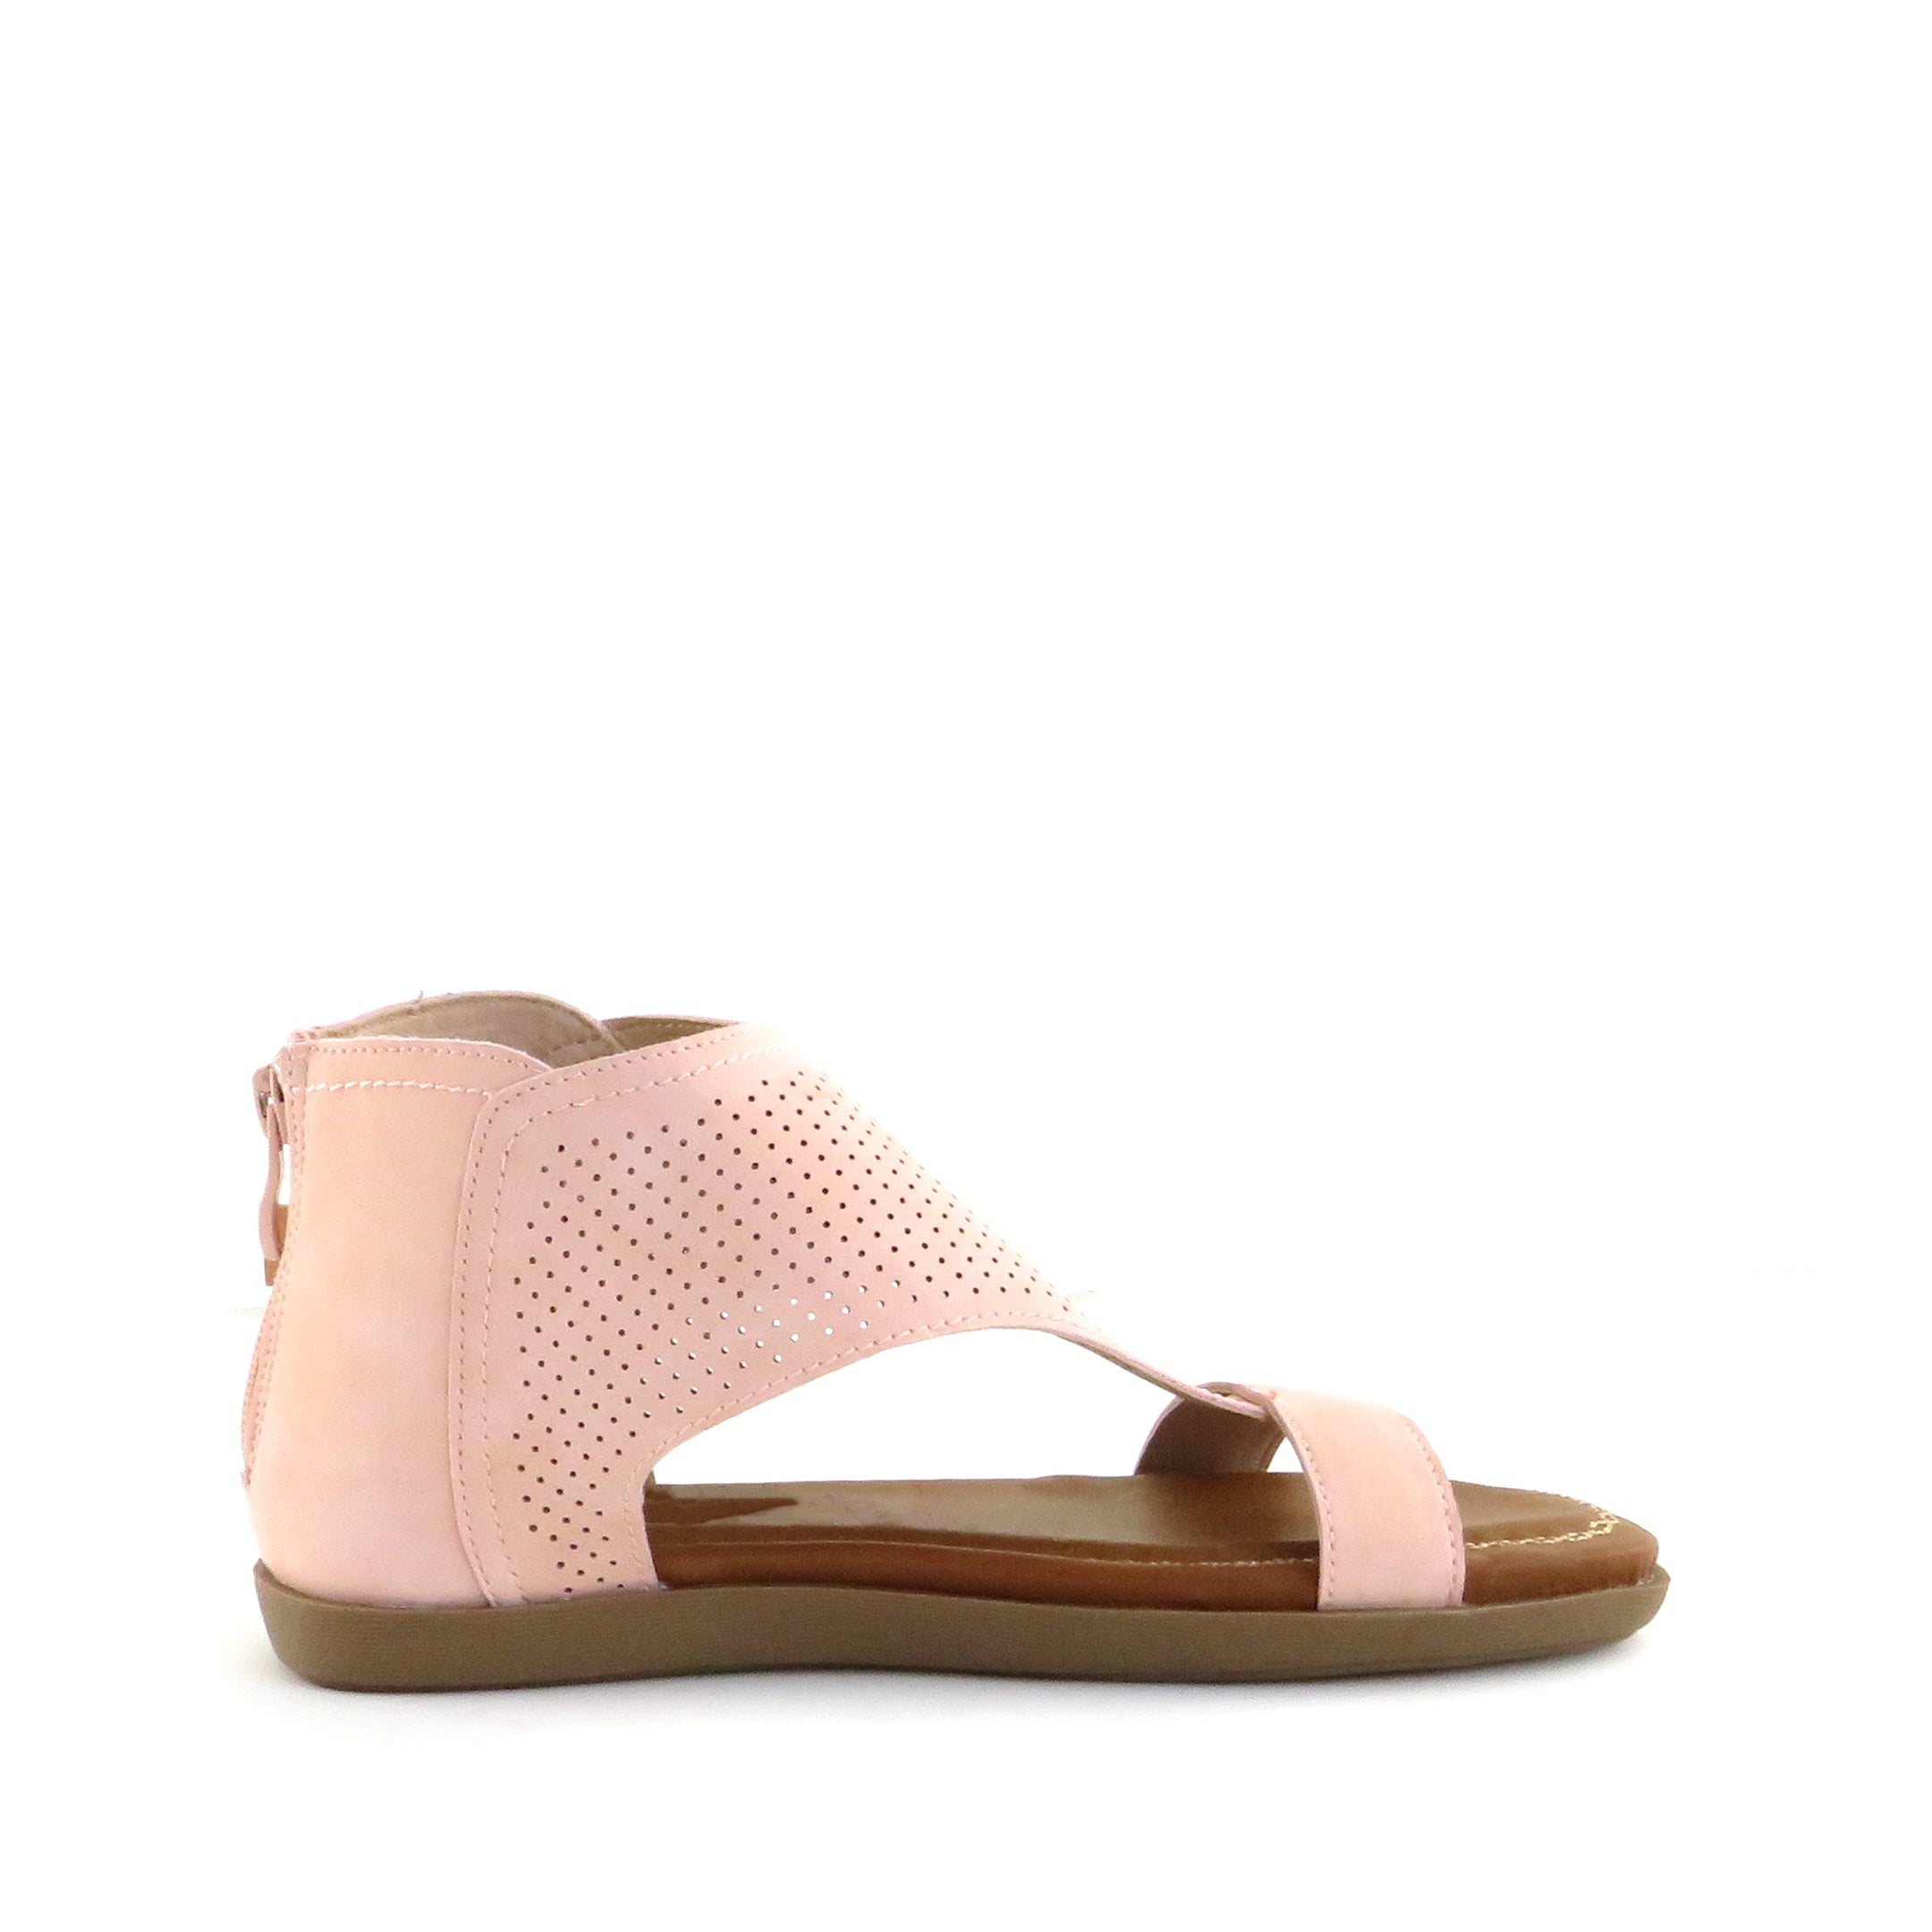 Buy Women's Coop Peach Perforated Sandal by Nest Shoes